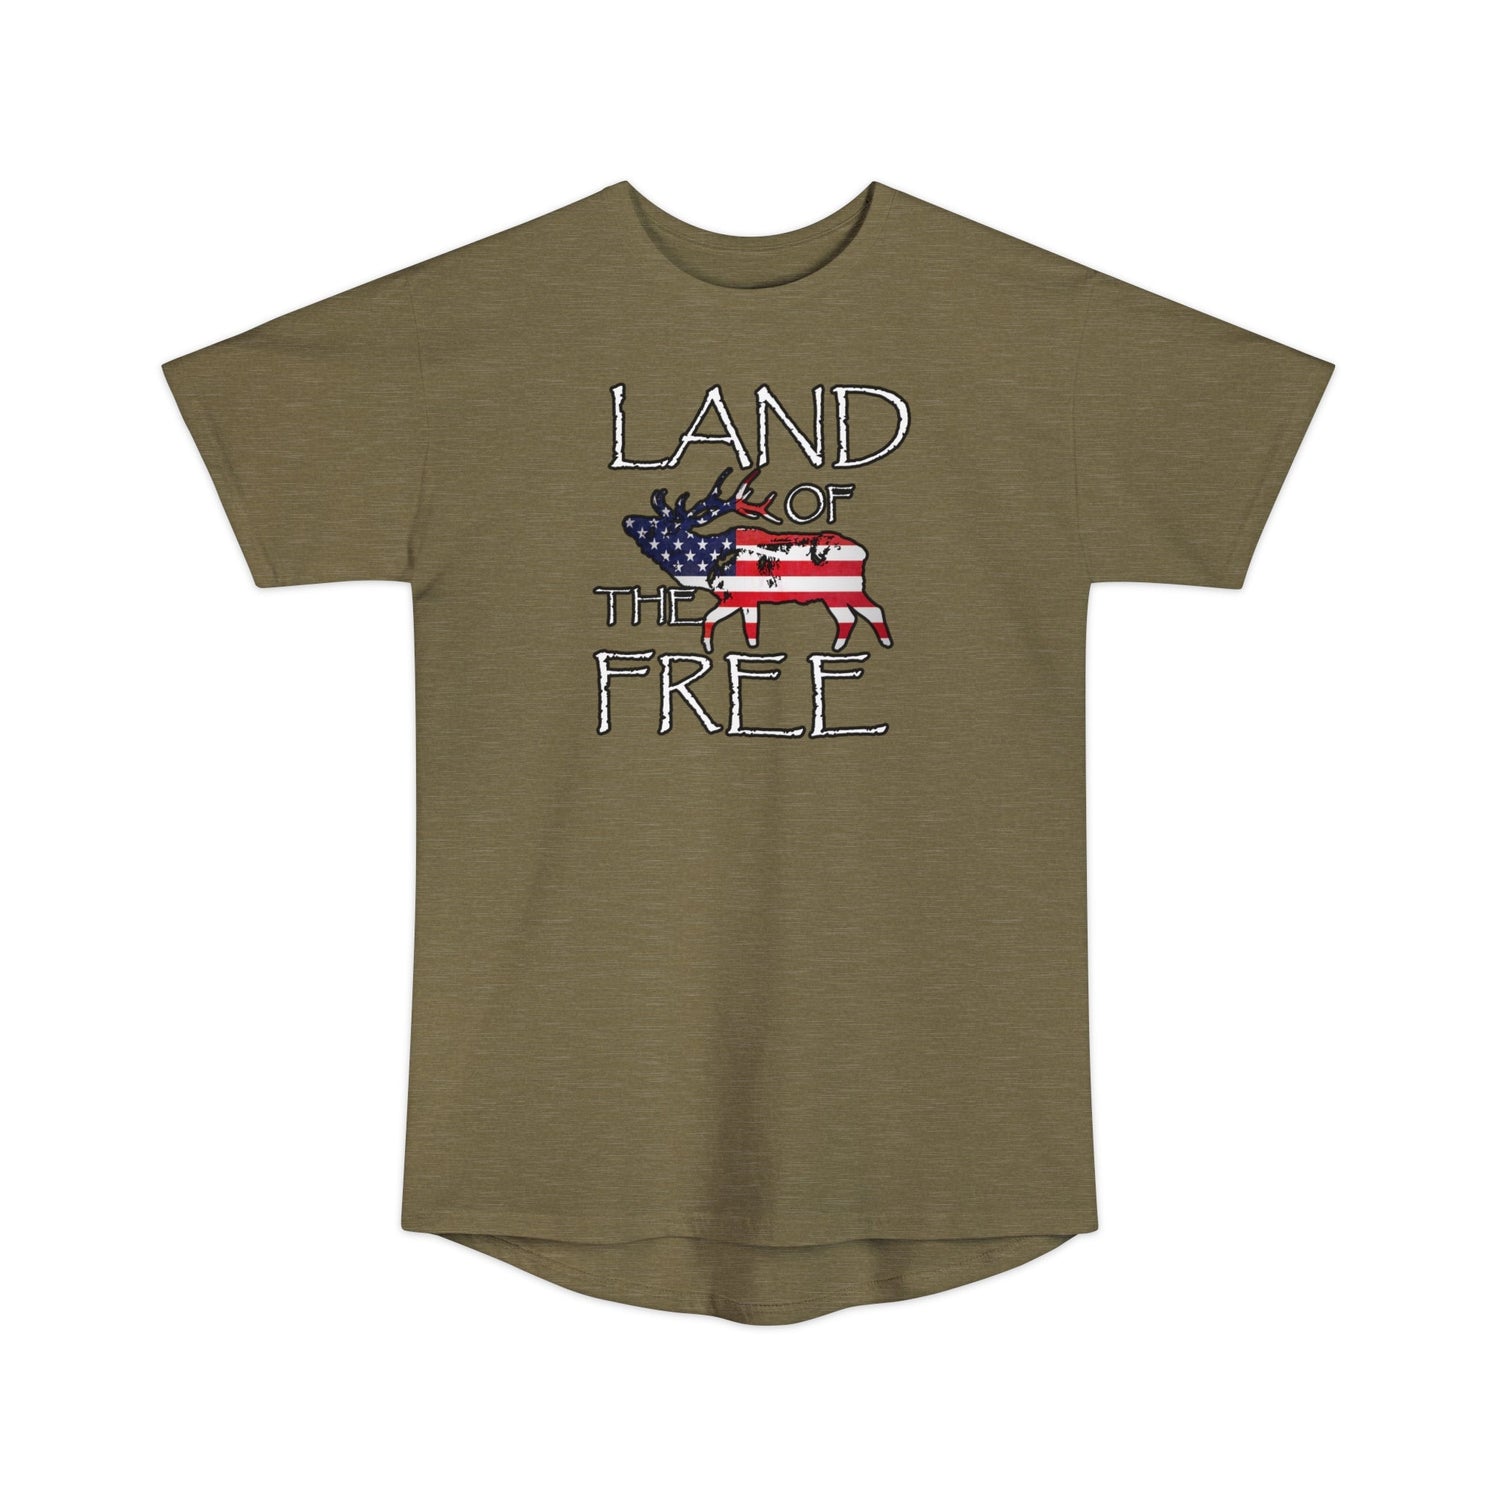 Athletic tall patriotic elk hunting t-shirt, color tan, front design placement